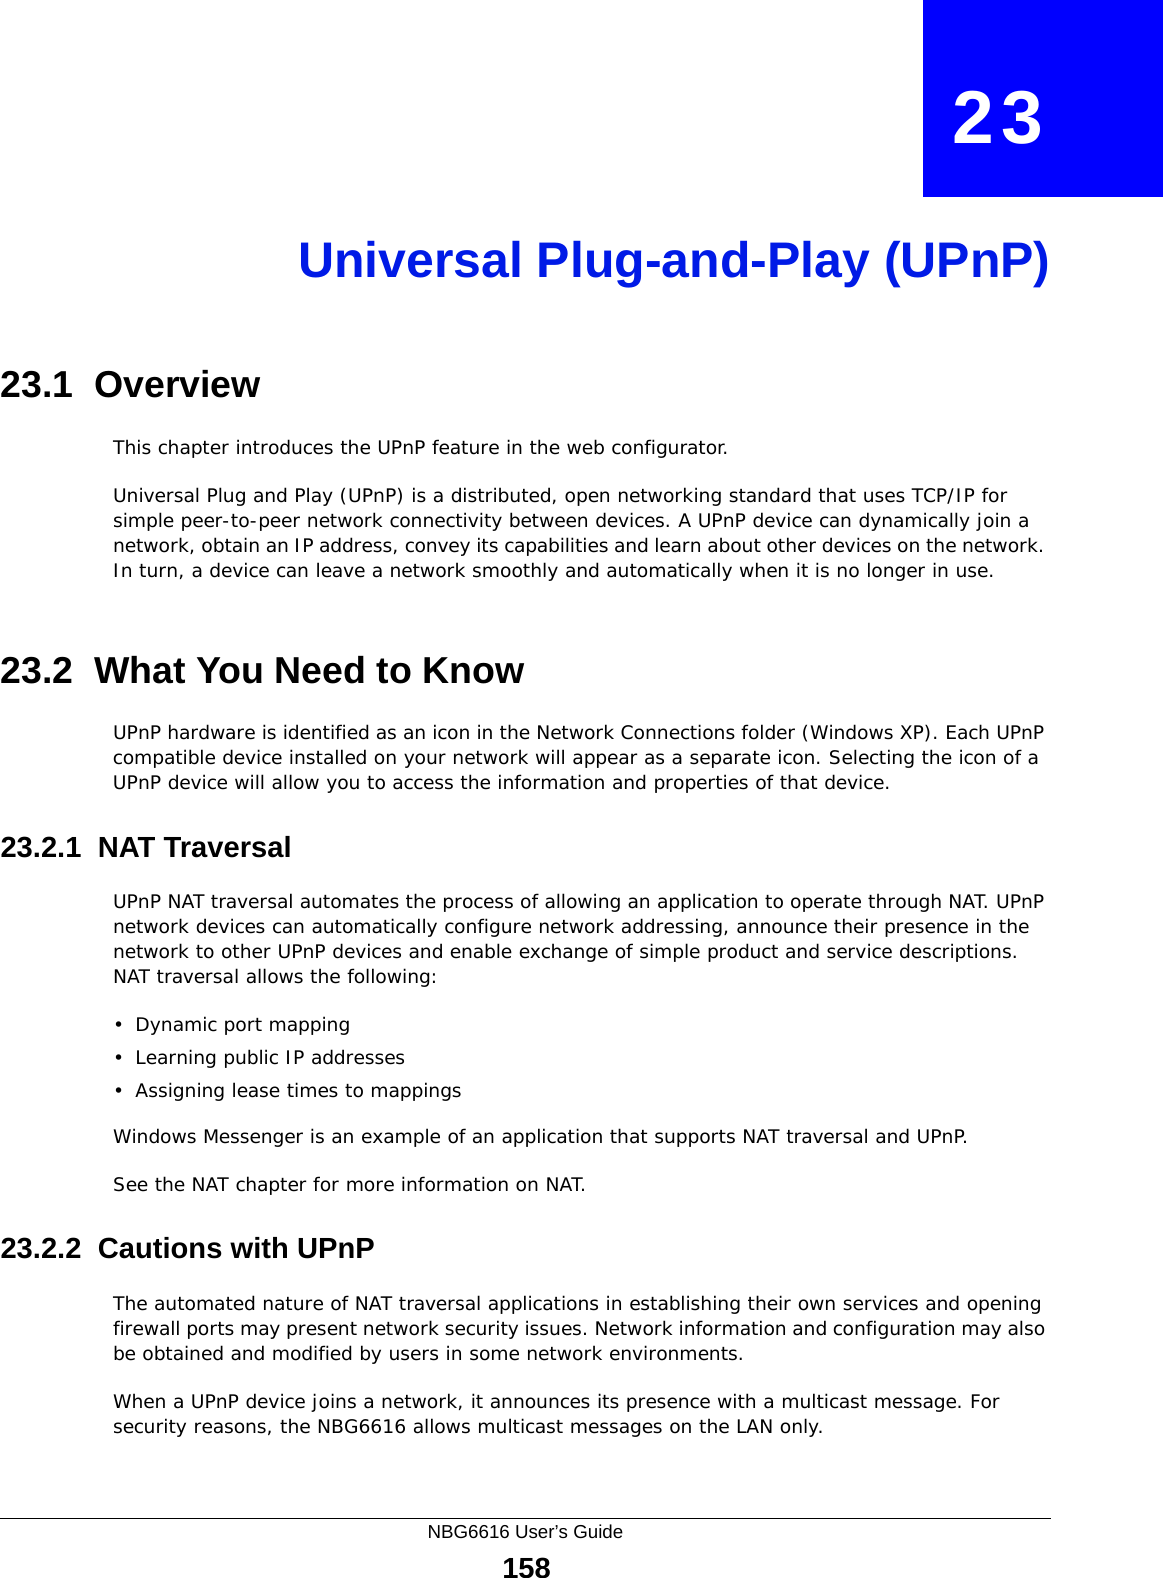 NBG6616 User’s Guide158CHAPTER   23Universal Plug-and-Play (UPnP)23.1  Overview This chapter introduces the UPnP feature in the web configurator.Universal Plug and Play (UPnP) is a distributed, open networking standard that uses TCP/IP for simple peer-to-peer network connectivity between devices. A UPnP device can dynamically join a network, obtain an IP address, convey its capabilities and learn about other devices on the network. In turn, a device can leave a network smoothly and automatically when it is no longer in use.23.2  What You Need to KnowUPnP hardware is identified as an icon in the Network Connections folder (Windows XP). Each UPnP compatible device installed on your network will appear as a separate icon. Selecting the icon of a UPnP device will allow you to access the information and properties of that device. 23.2.1  NAT TraversalUPnP NAT traversal automates the process of allowing an application to operate through NAT. UPnP network devices can automatically configure network addressing, announce their presence in the network to other UPnP devices and enable exchange of simple product and service descriptions. NAT traversal allows the following:• Dynamic port mapping• Learning public IP addresses• Assigning lease times to mappingsWindows Messenger is an example of an application that supports NAT traversal and UPnP. See the NAT chapter for more information on NAT.23.2.2  Cautions with UPnPThe automated nature of NAT traversal applications in establishing their own services and opening firewall ports may present network security issues. Network information and configuration may also be obtained and modified by users in some network environments. When a UPnP device joins a network, it announces its presence with a multicast message. For security reasons, the NBG6616 allows multicast messages on the LAN only.